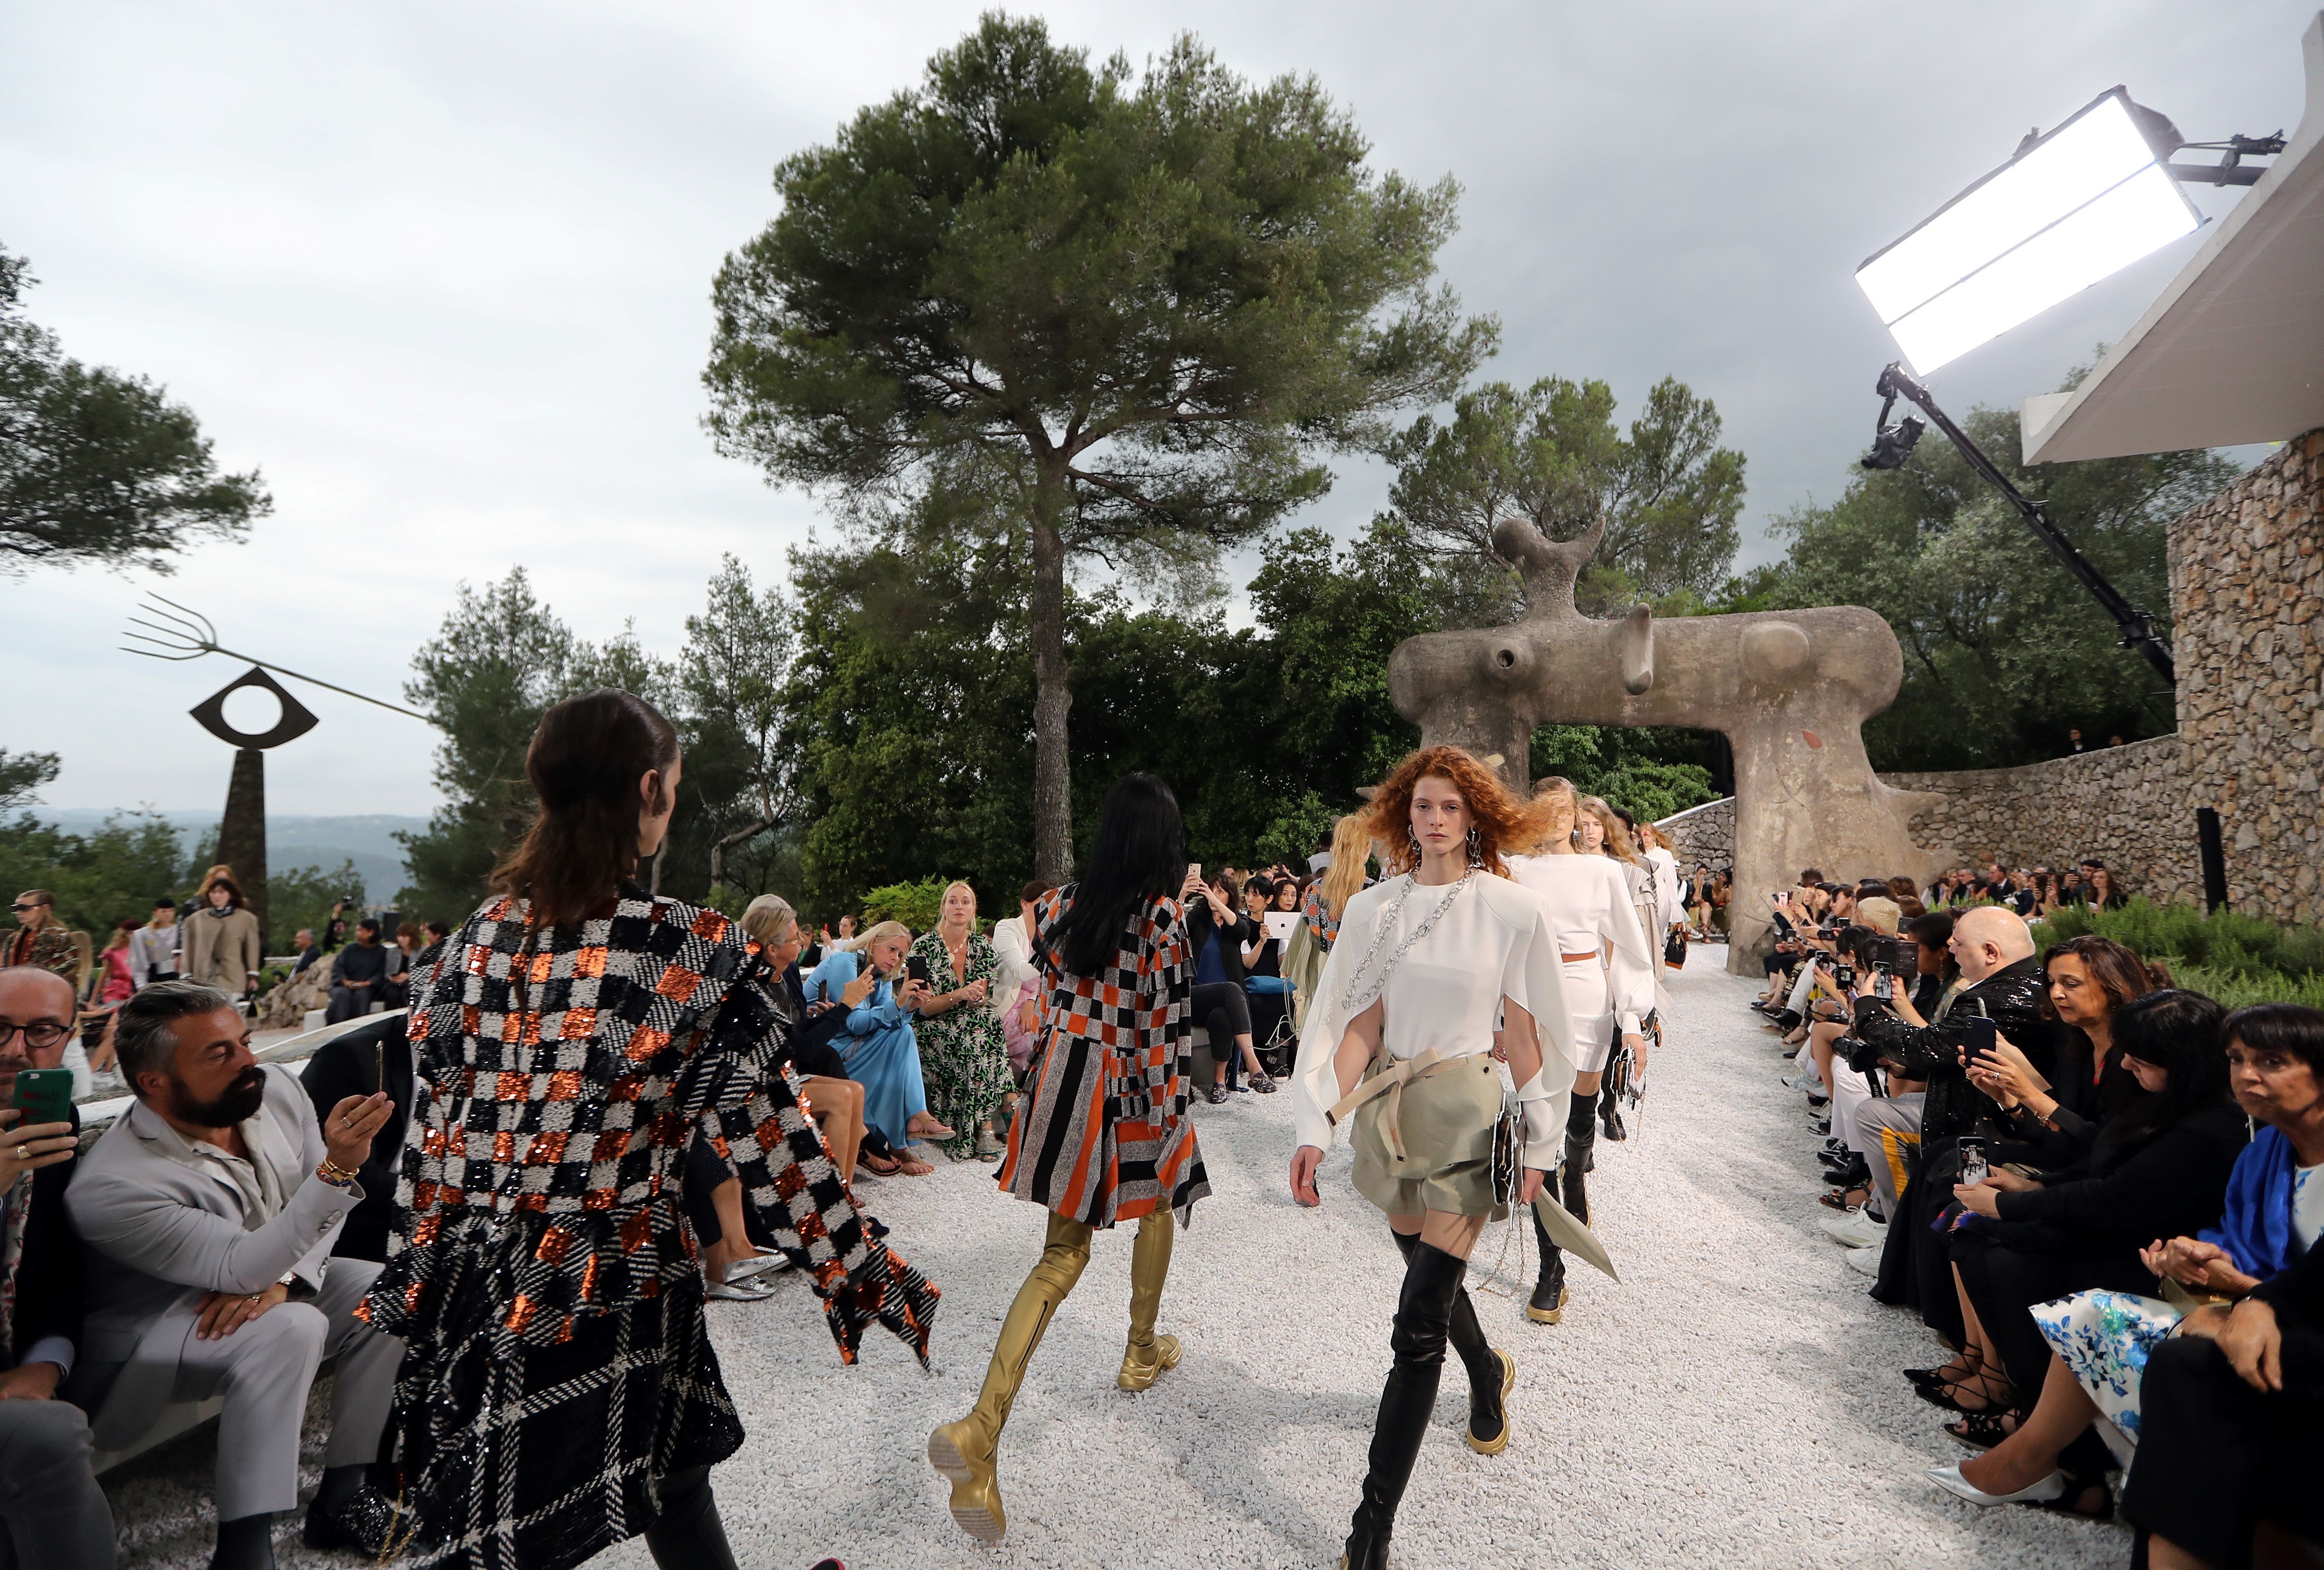 Louis Vuitton to Stage Cruise Show at 's Miho Museum